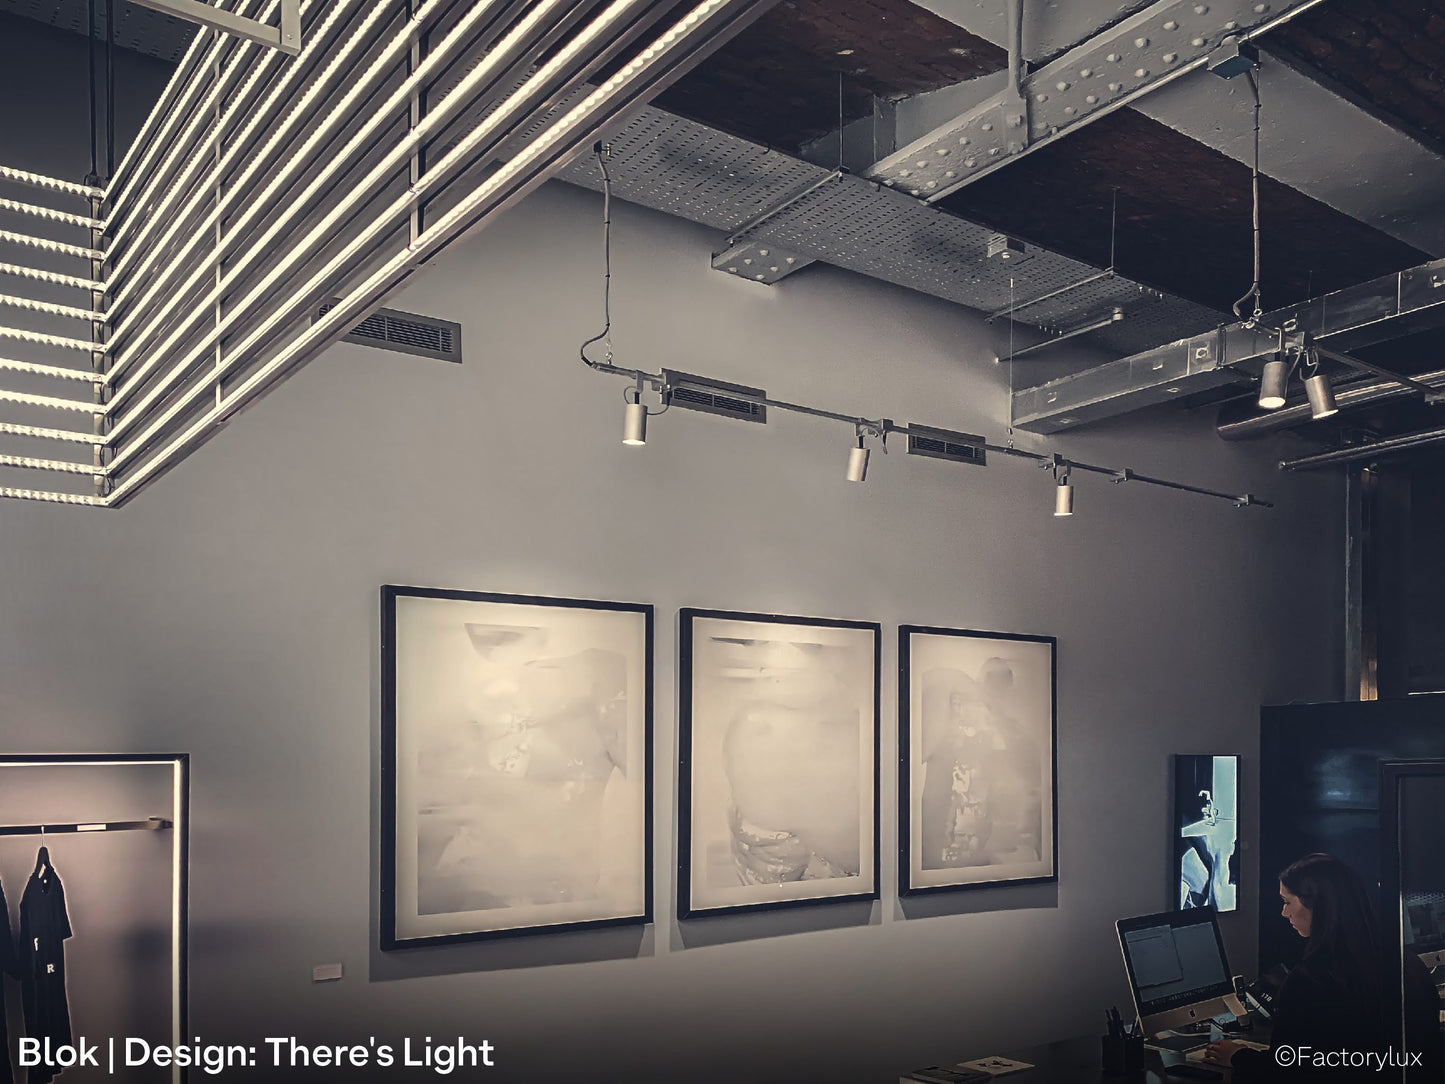 Raw aluminium architectural spotlights, ceiling mounted on steel conduit tubes to light paintings in an art gallery 